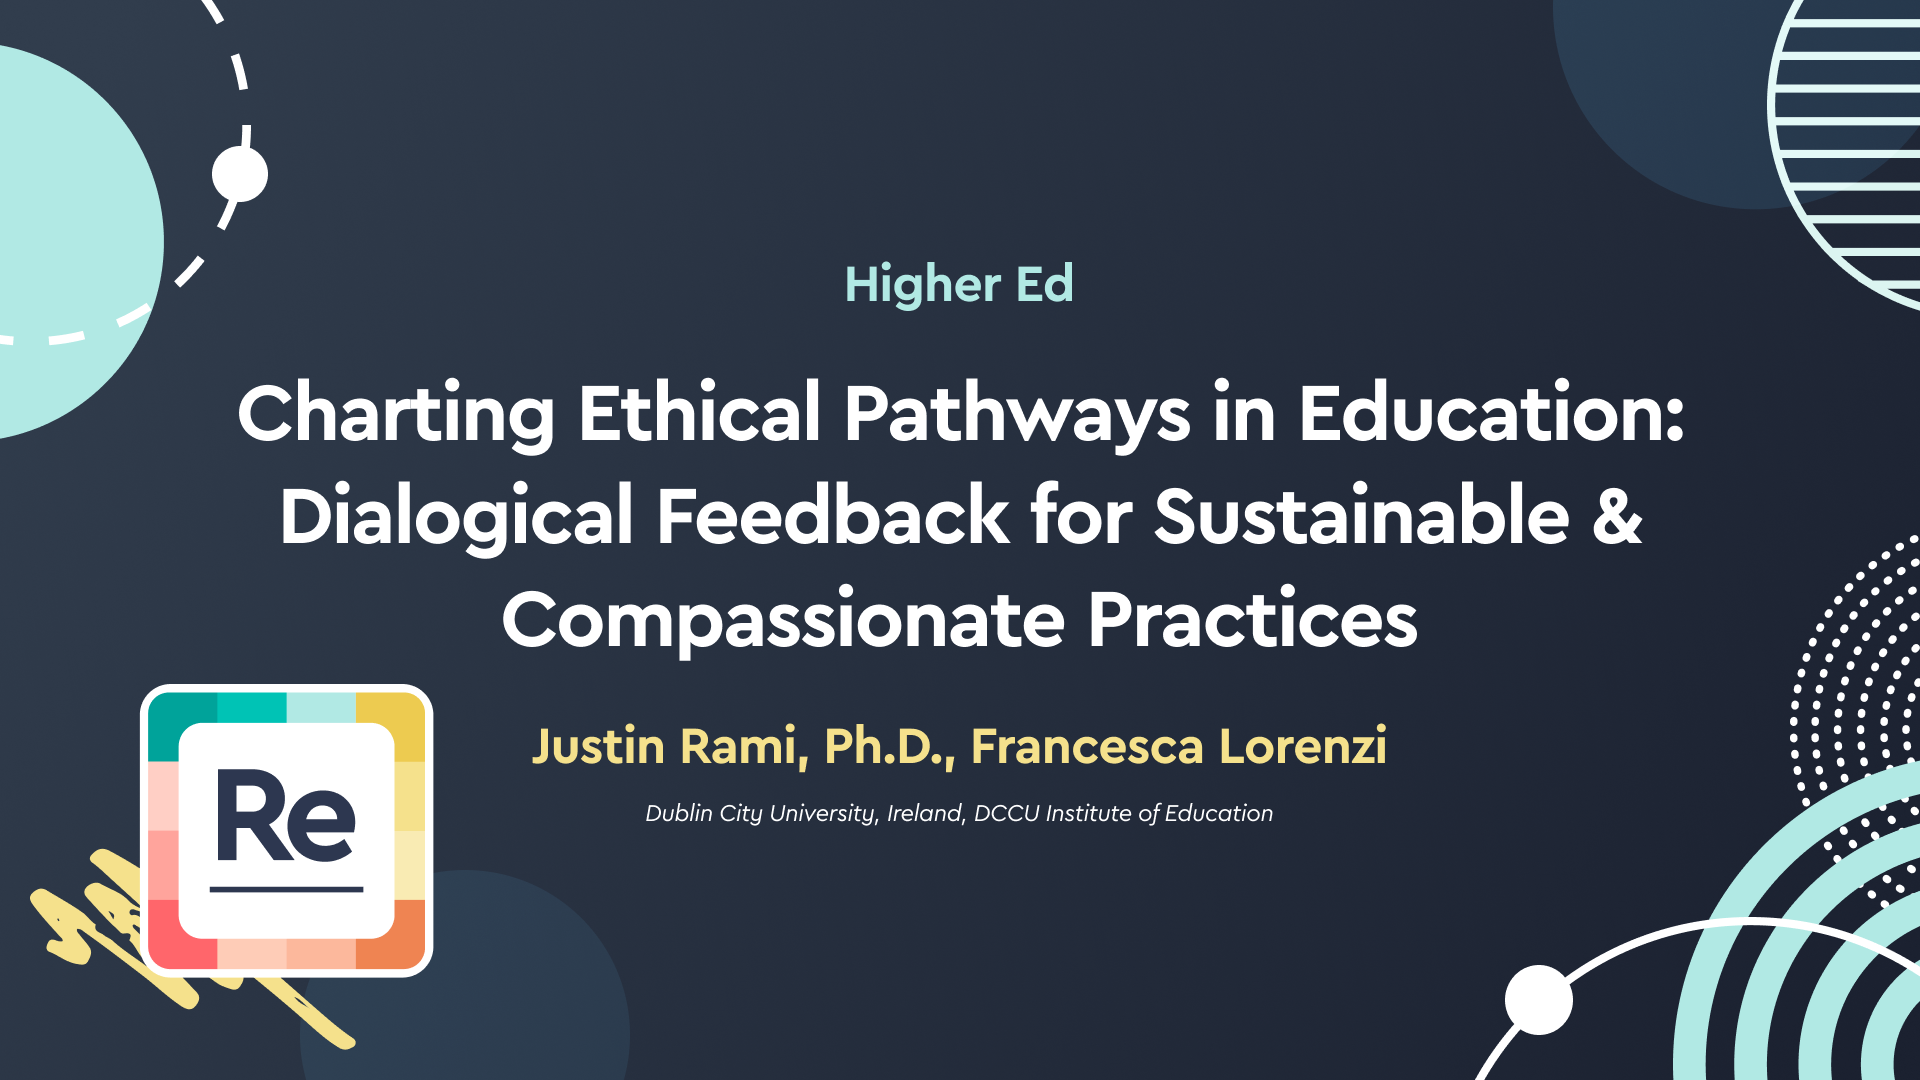 Charting Ethical Pathways in Education: Dialogical Feedback for Sustainable & Compassionate Practices